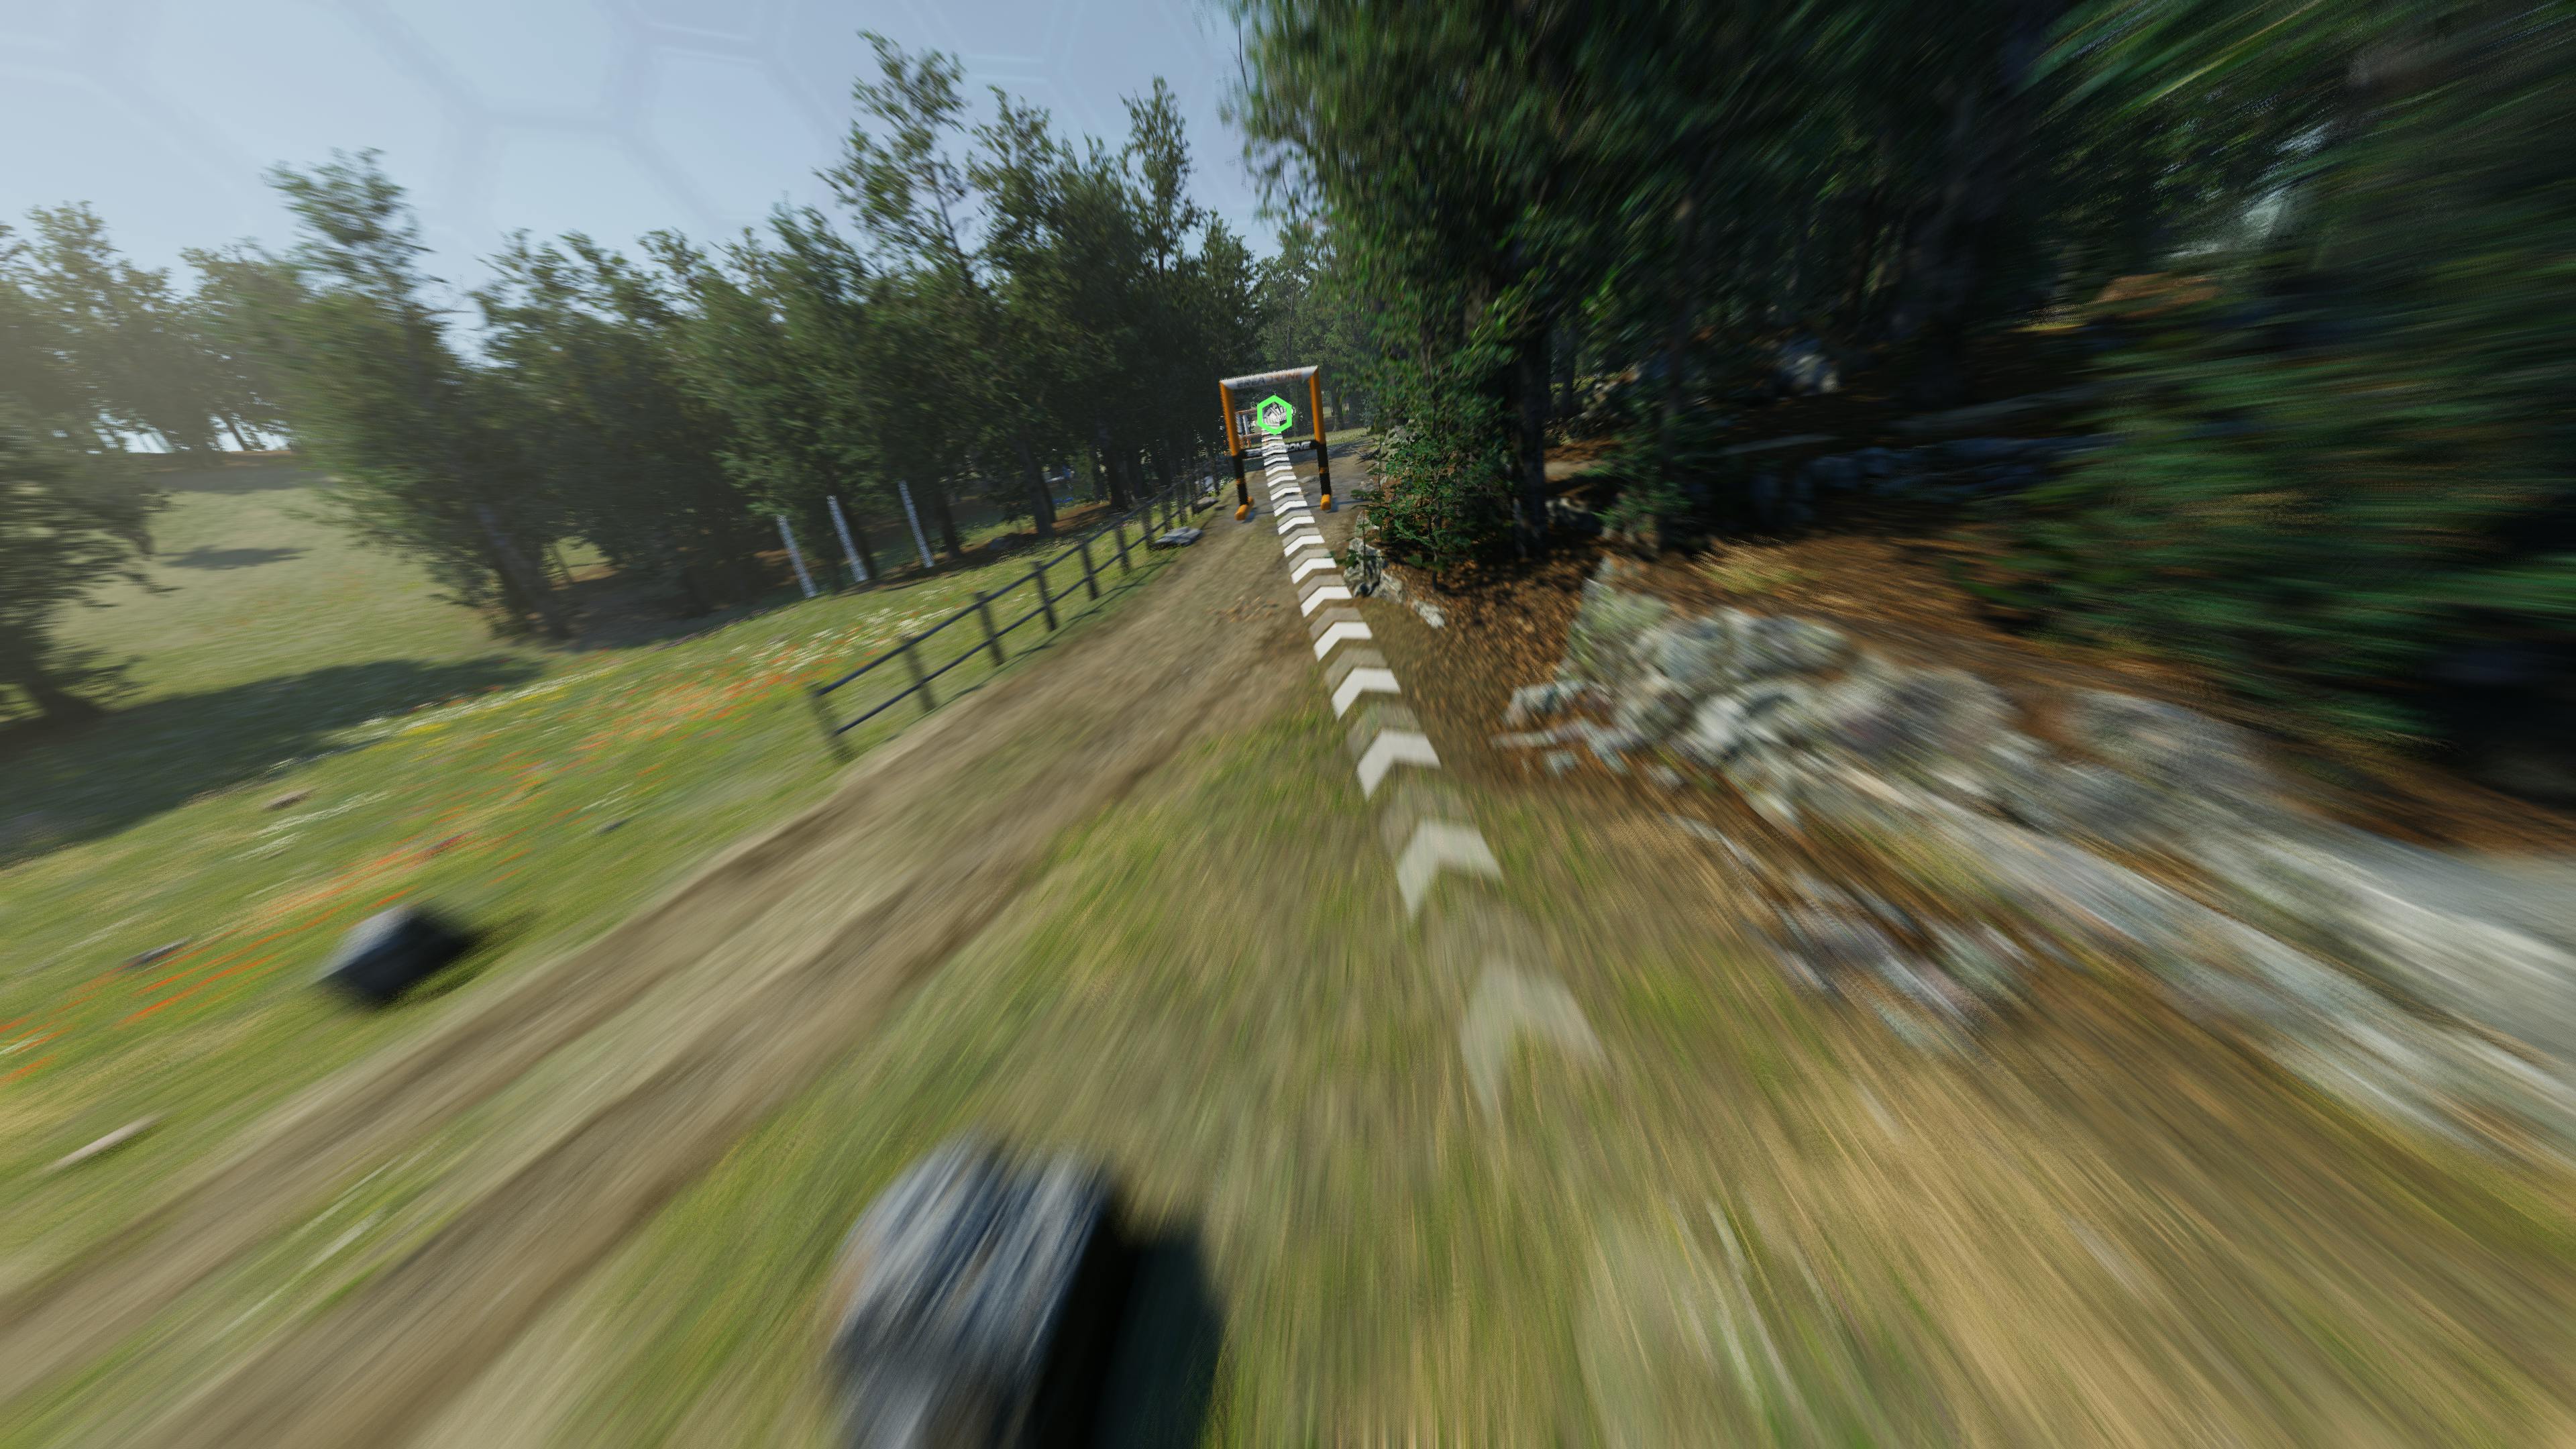 Racing in the Meadow environment